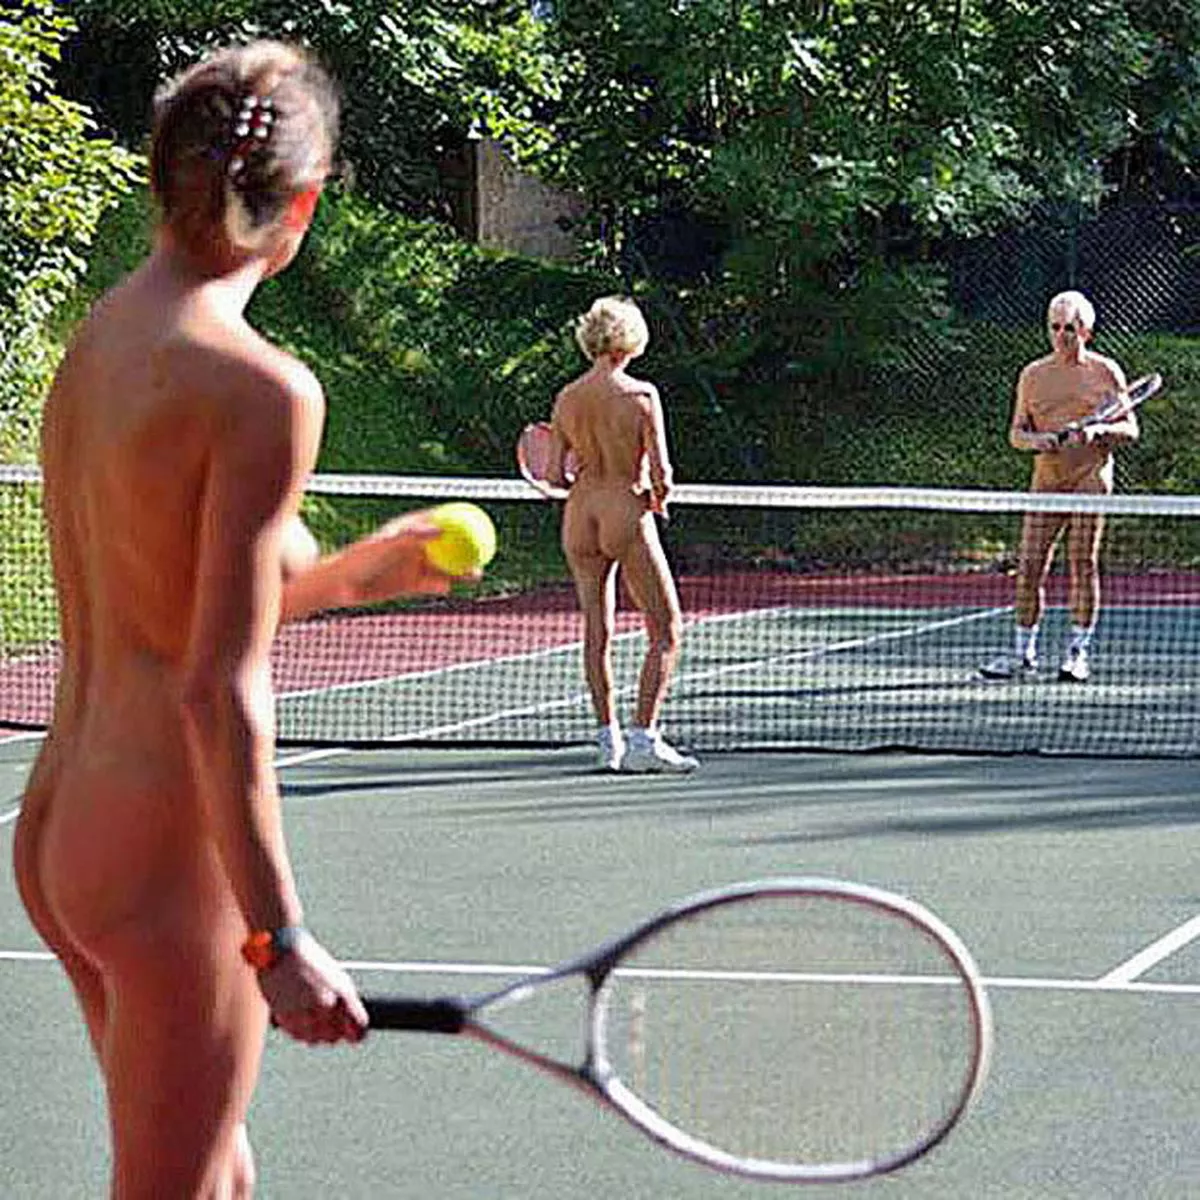 darlene tyler recommends nude tennis pics pic